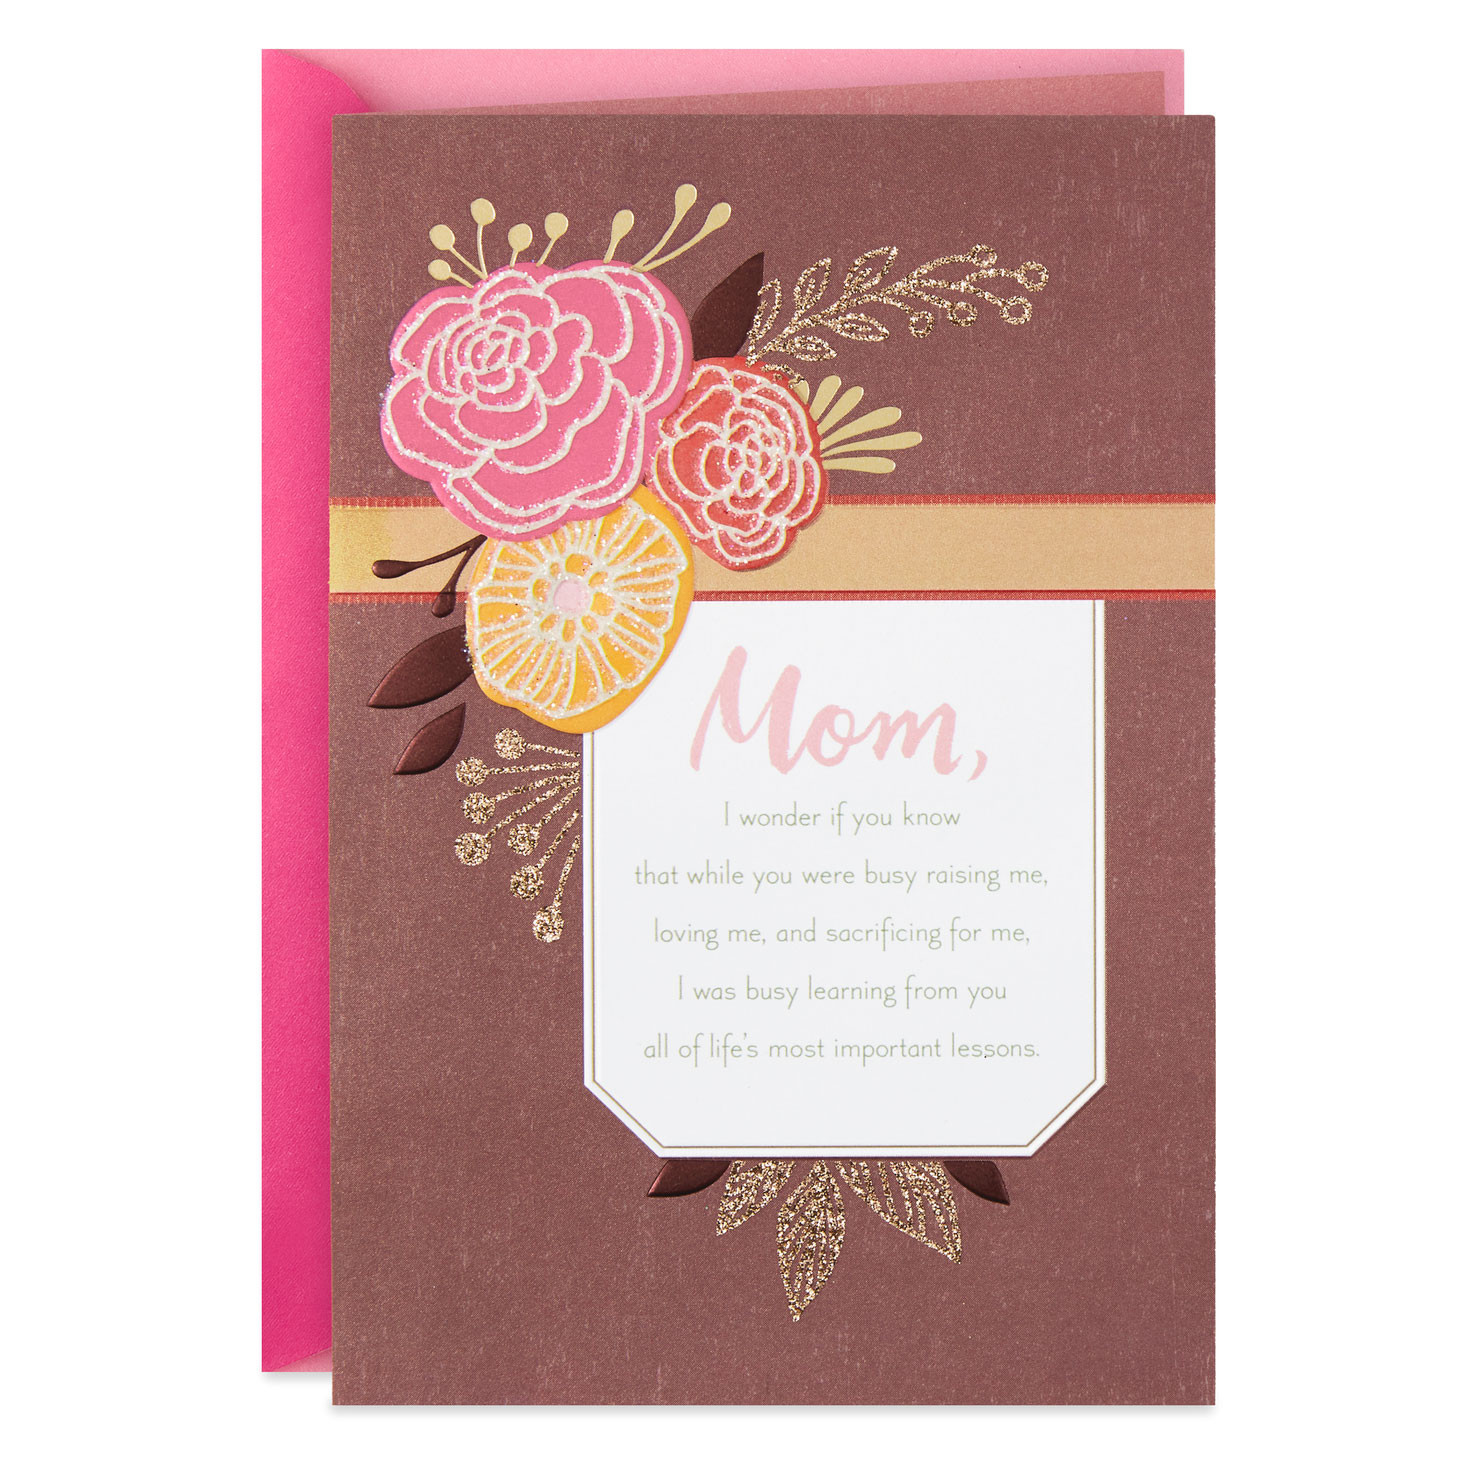 Mom Birthday Card
 Life s Most Important Lessons Birthday Card for Mom